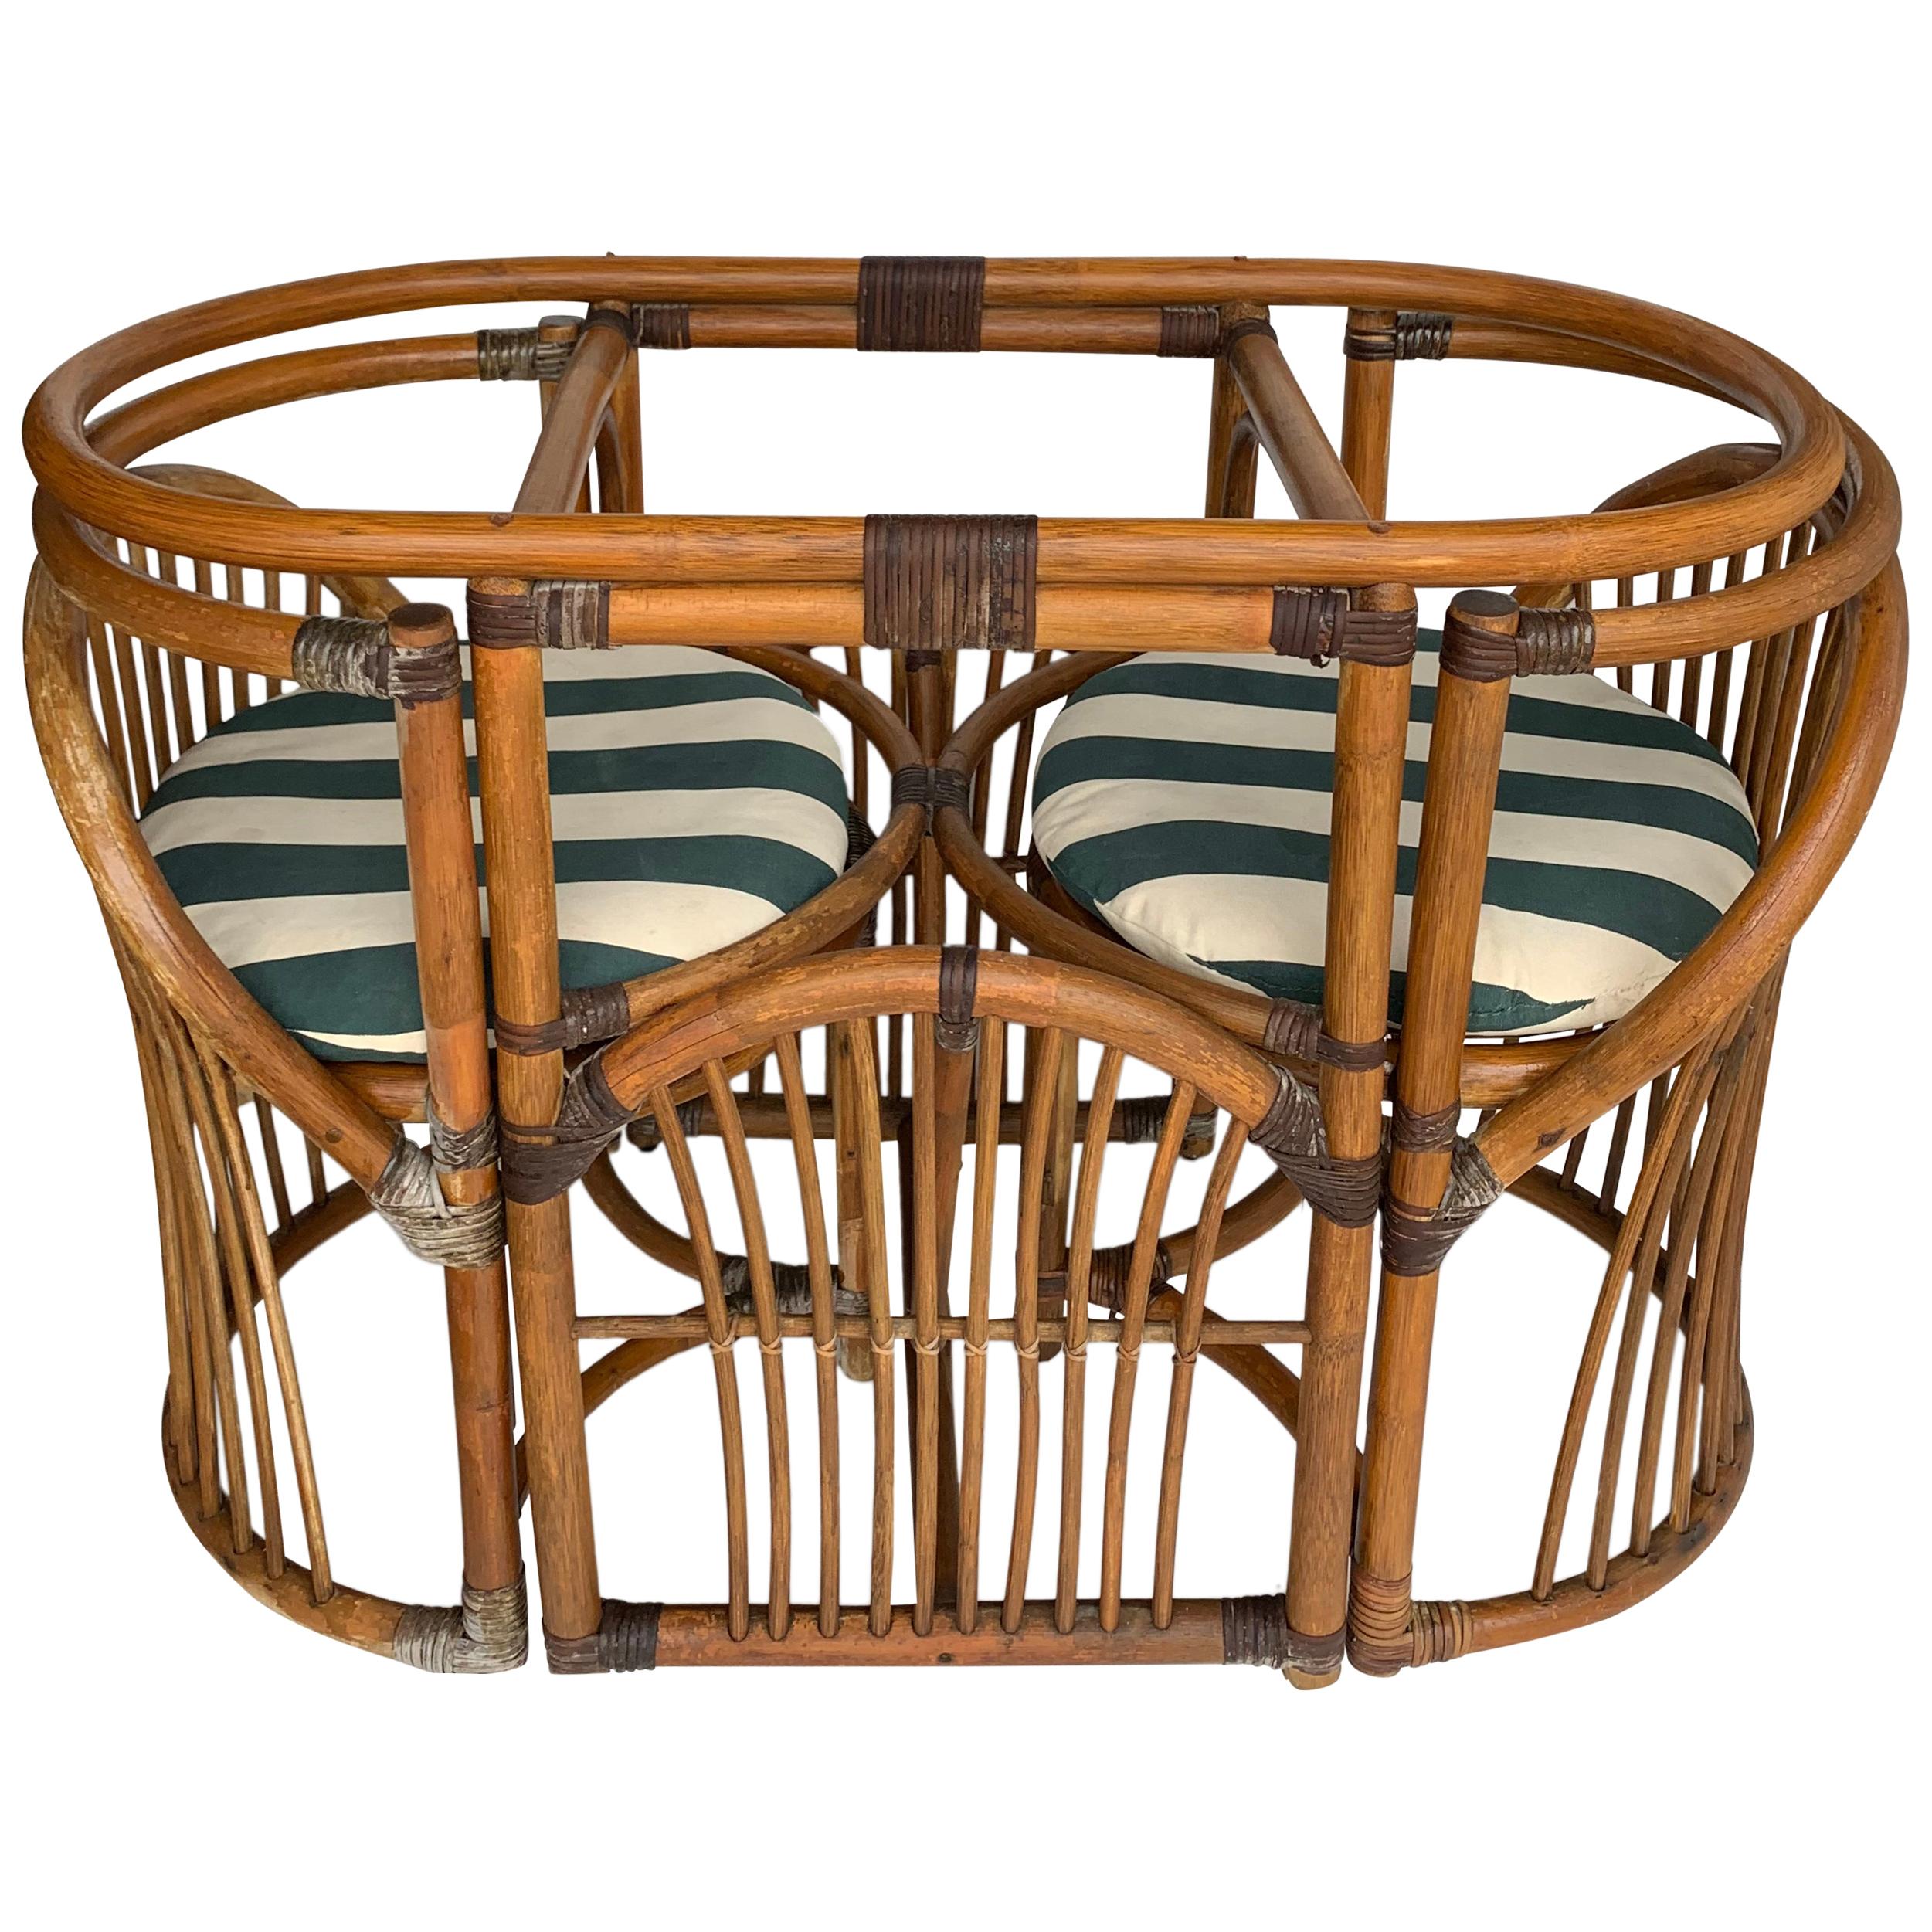 Tiger Wood Bamboo Rattan Dinning Table And Chairs Set 